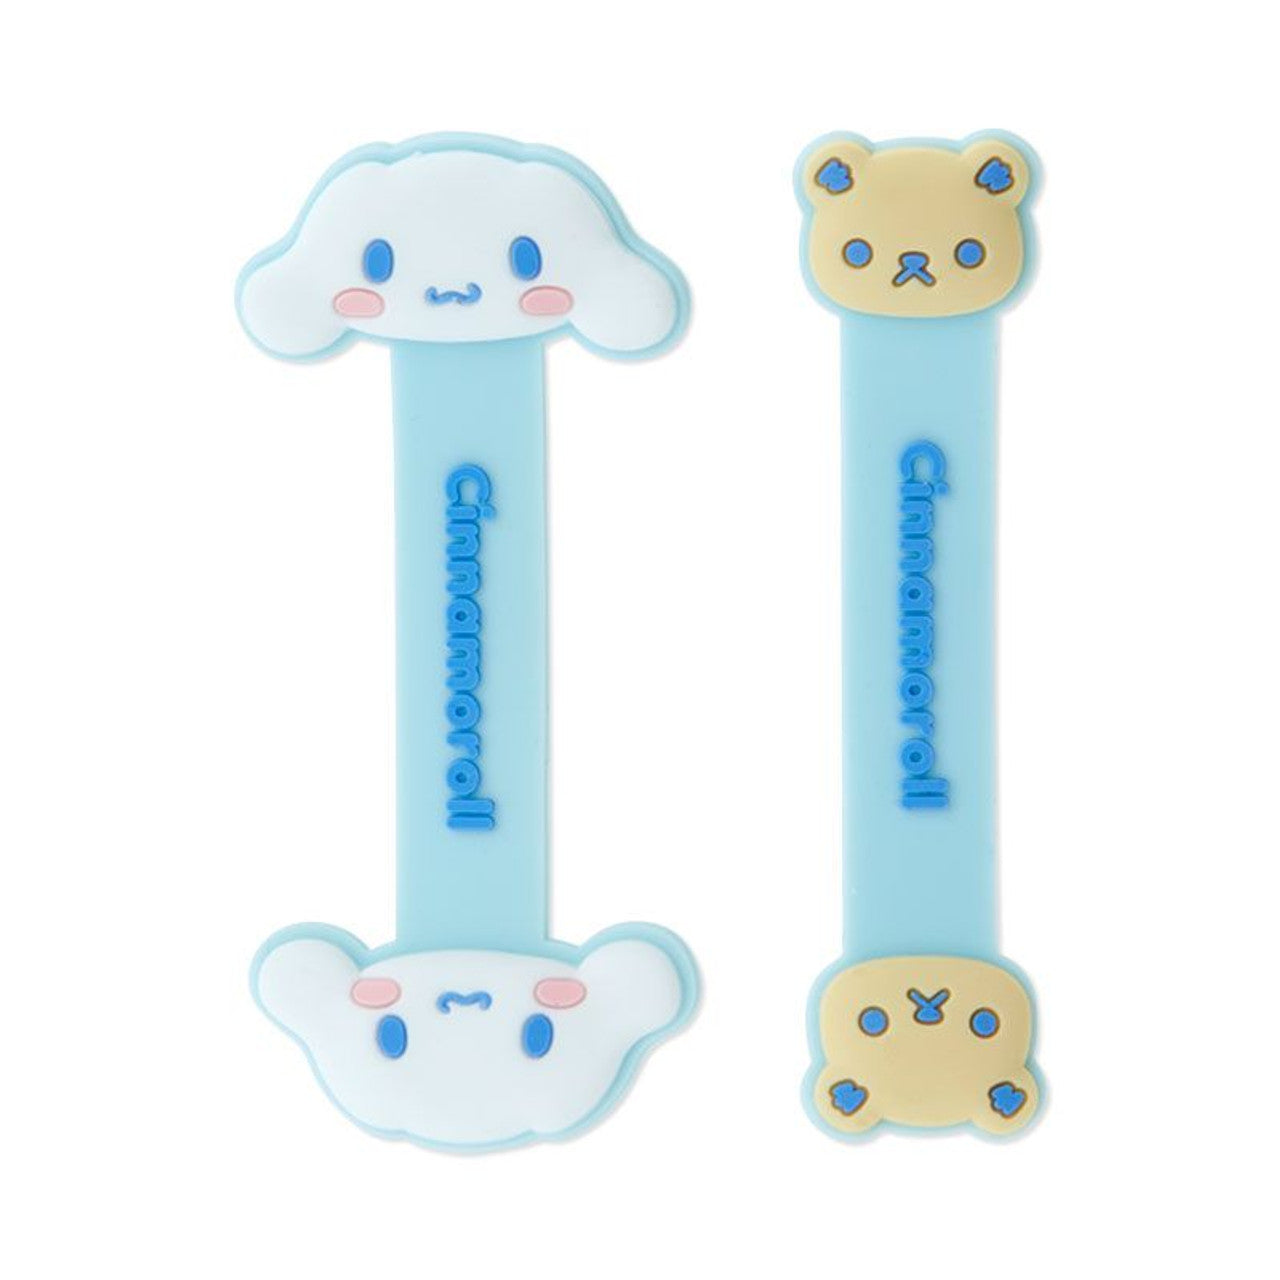 Sanrio Characters Cable Holder Clip Set of 2 (Cinnamoroll - 853542)